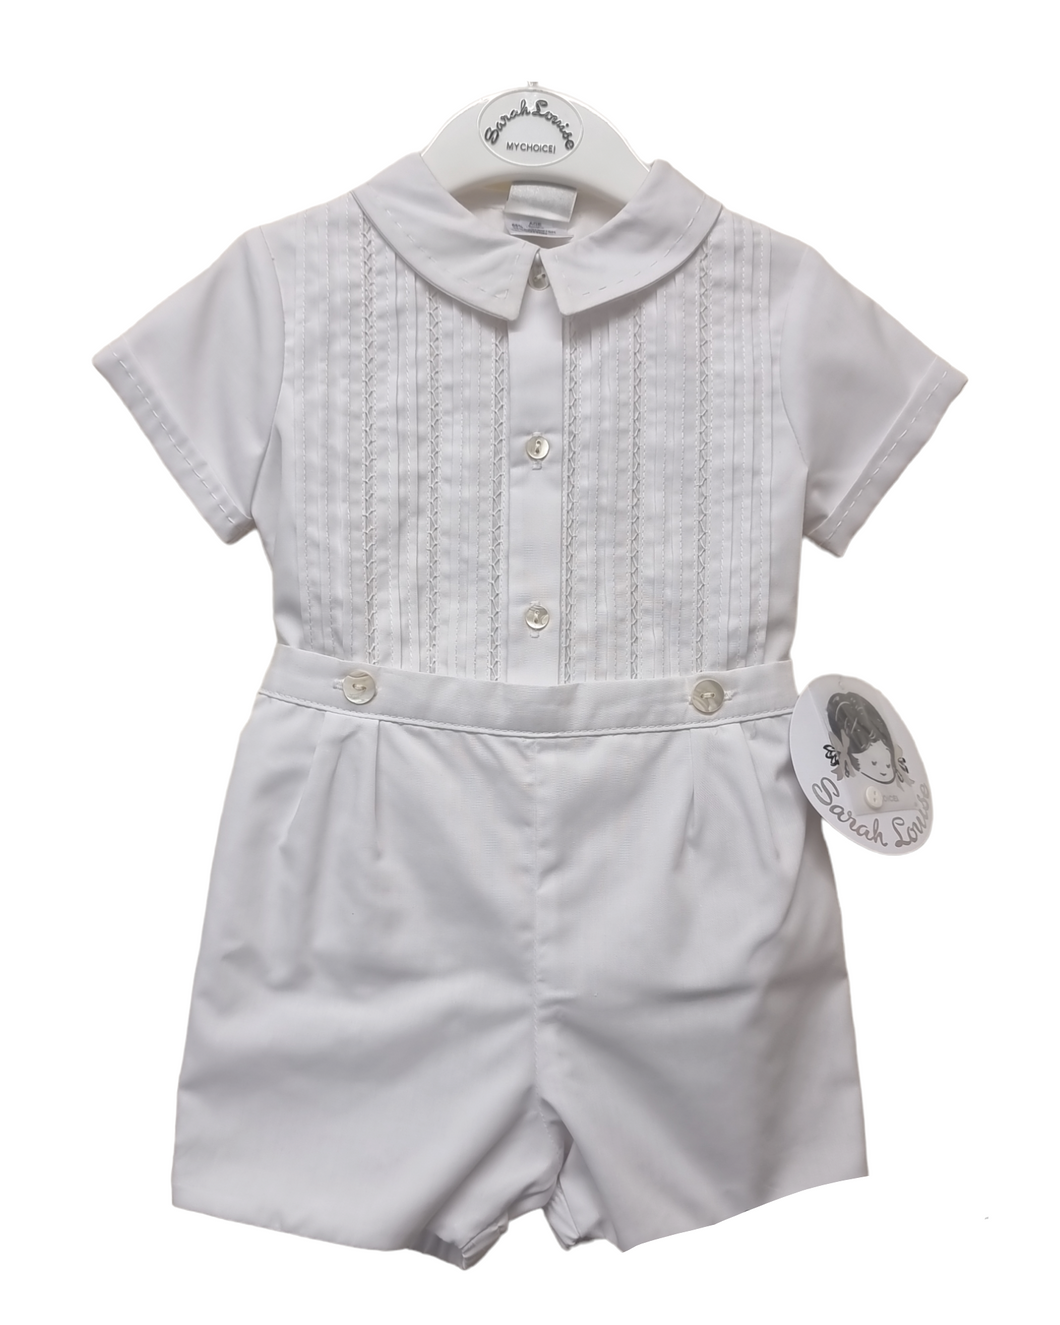 White 2 piece baby boys Ceremonial outfit